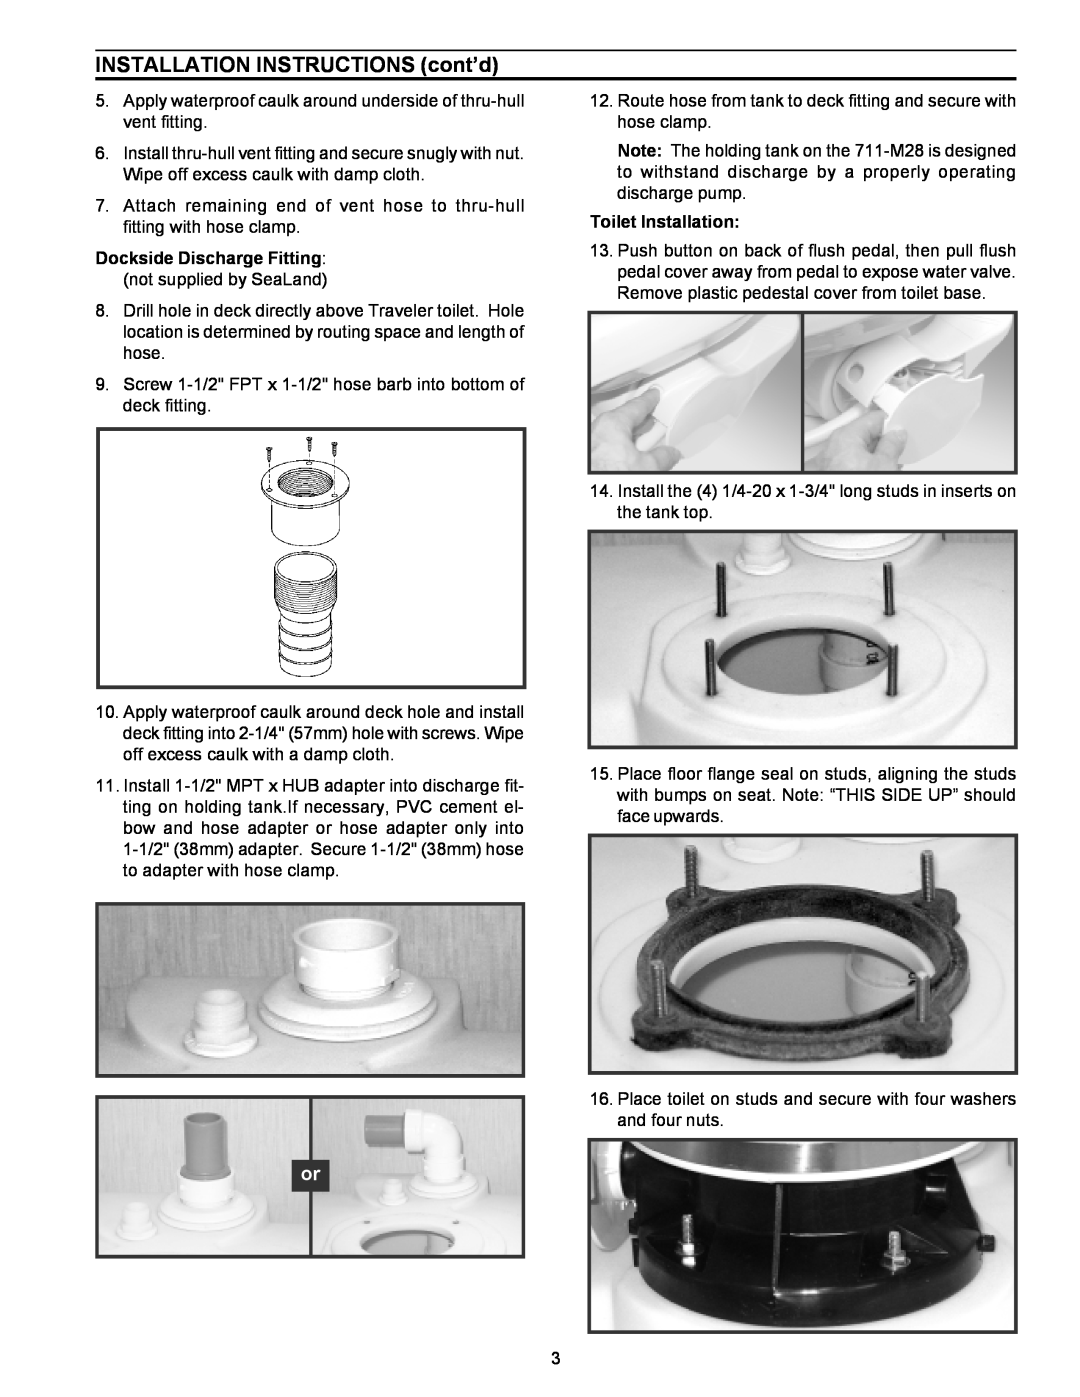 SeaLand 711-M28 owner manual INSTALLATION INSTRUCTIONS cont’d, Dockside Discharge Fitting, Toilet Installation 